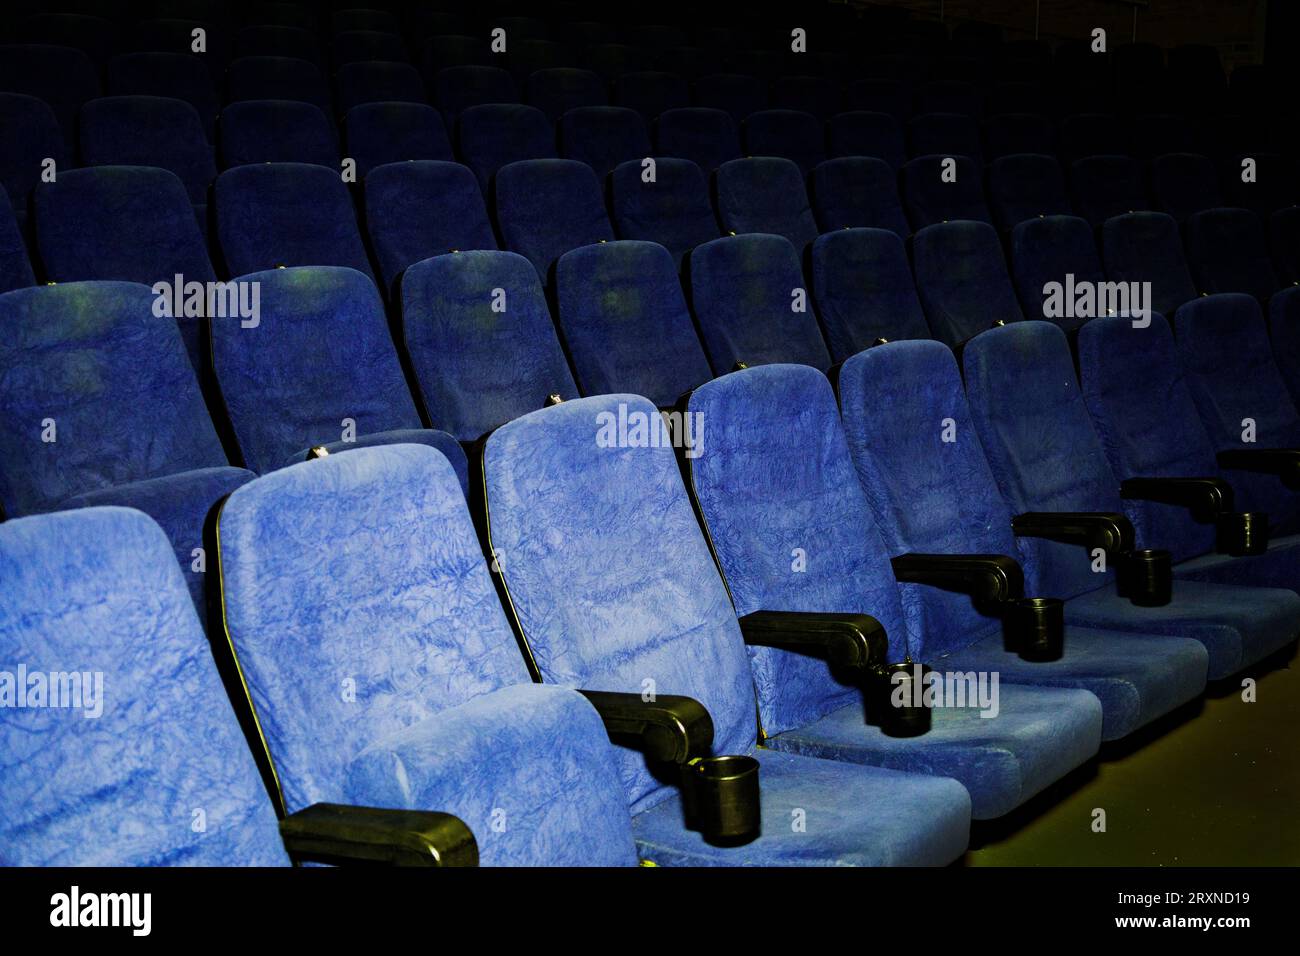 Modern cinema hall empty and blue comfortable seats, movie theater seats or chair. Stock Photo